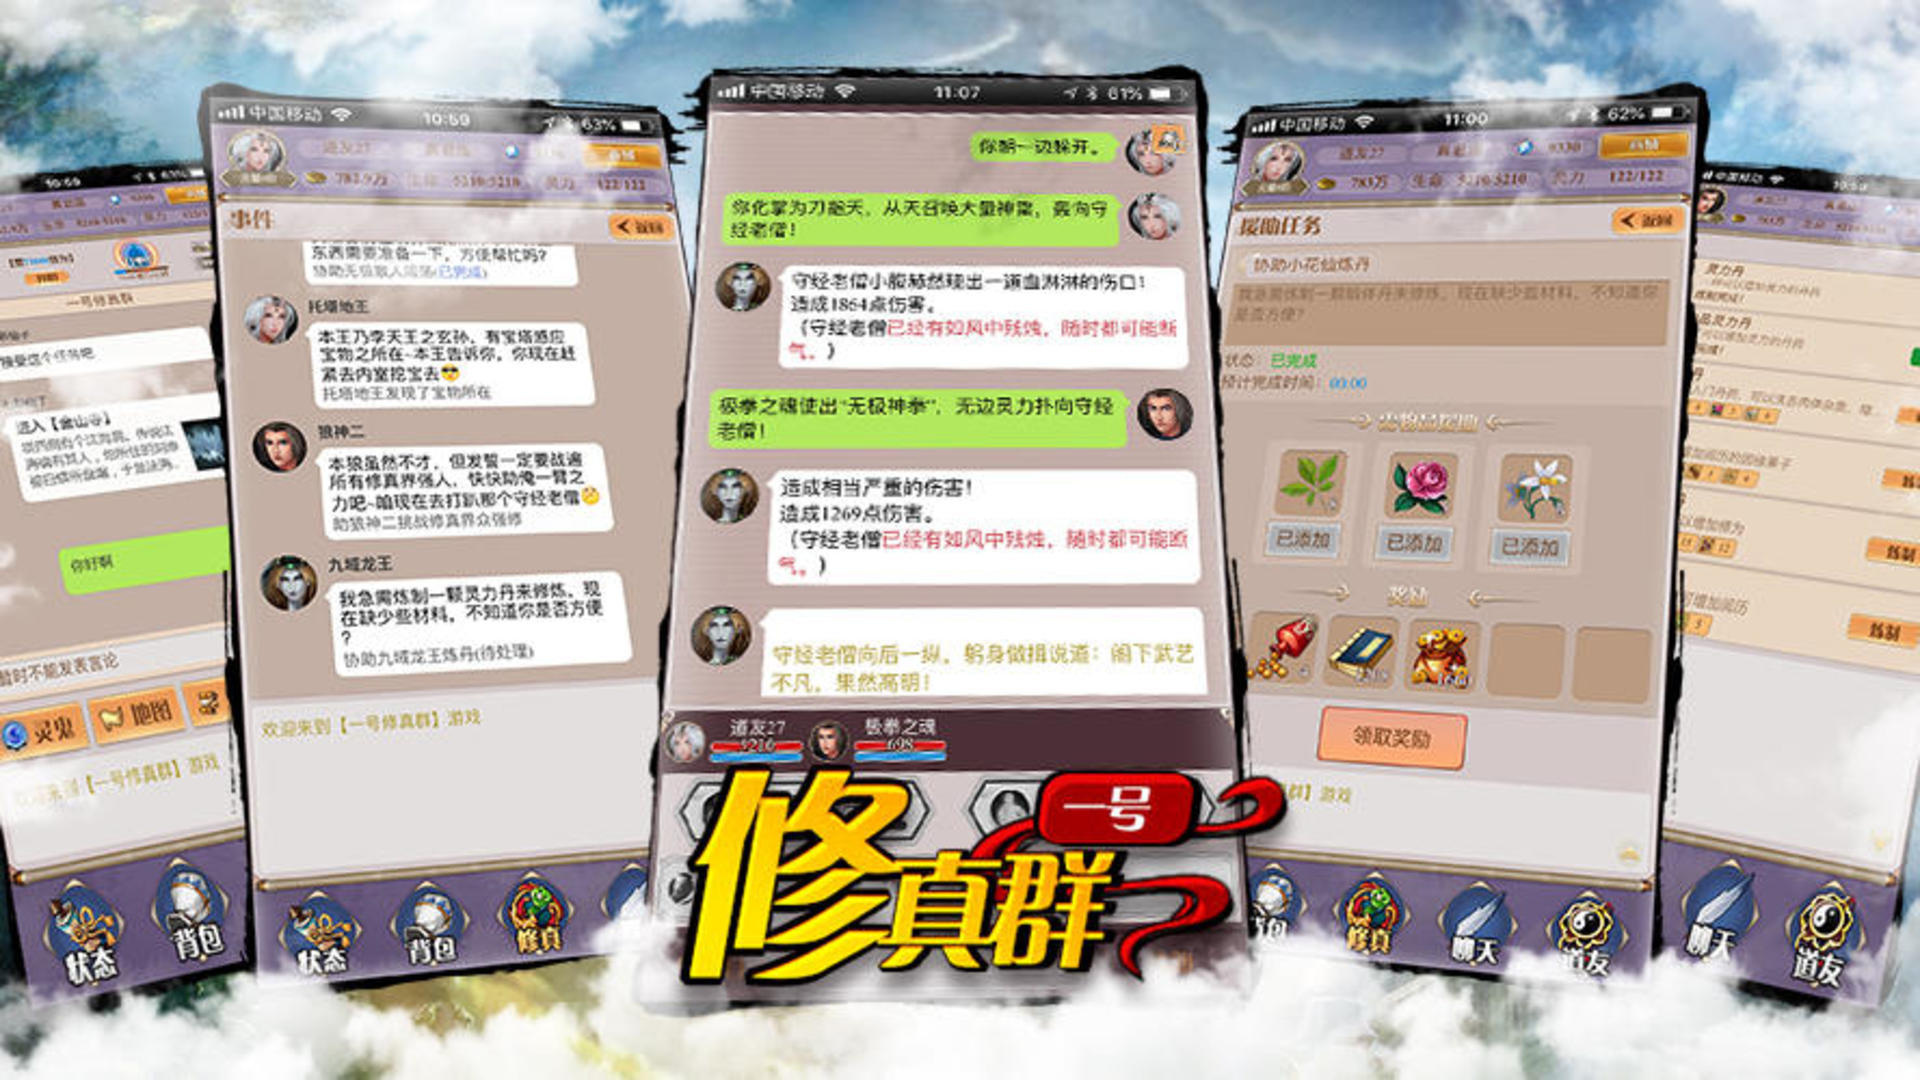 Banner of 第1理解グループ 